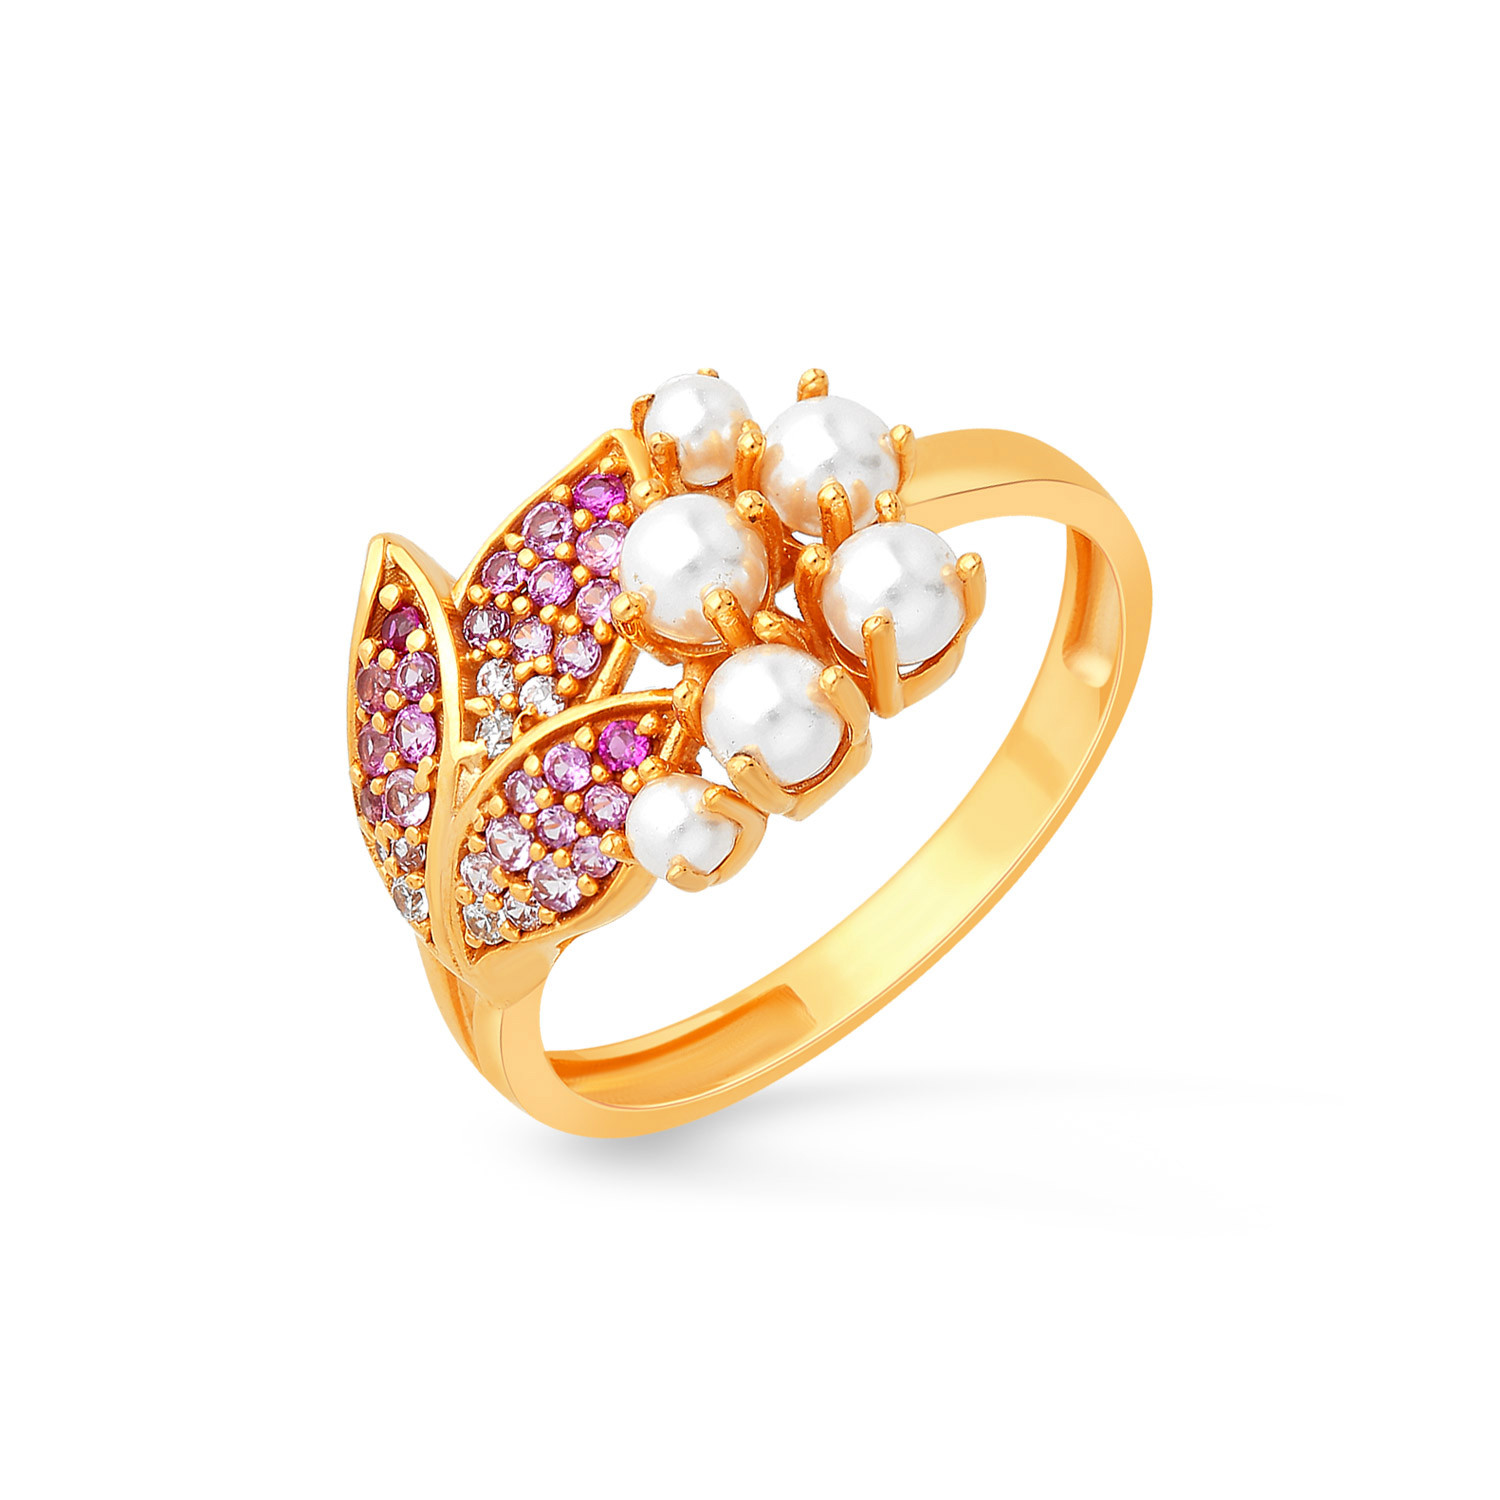 22K Gold Rings for Women - Queen of Hearts Jewelry